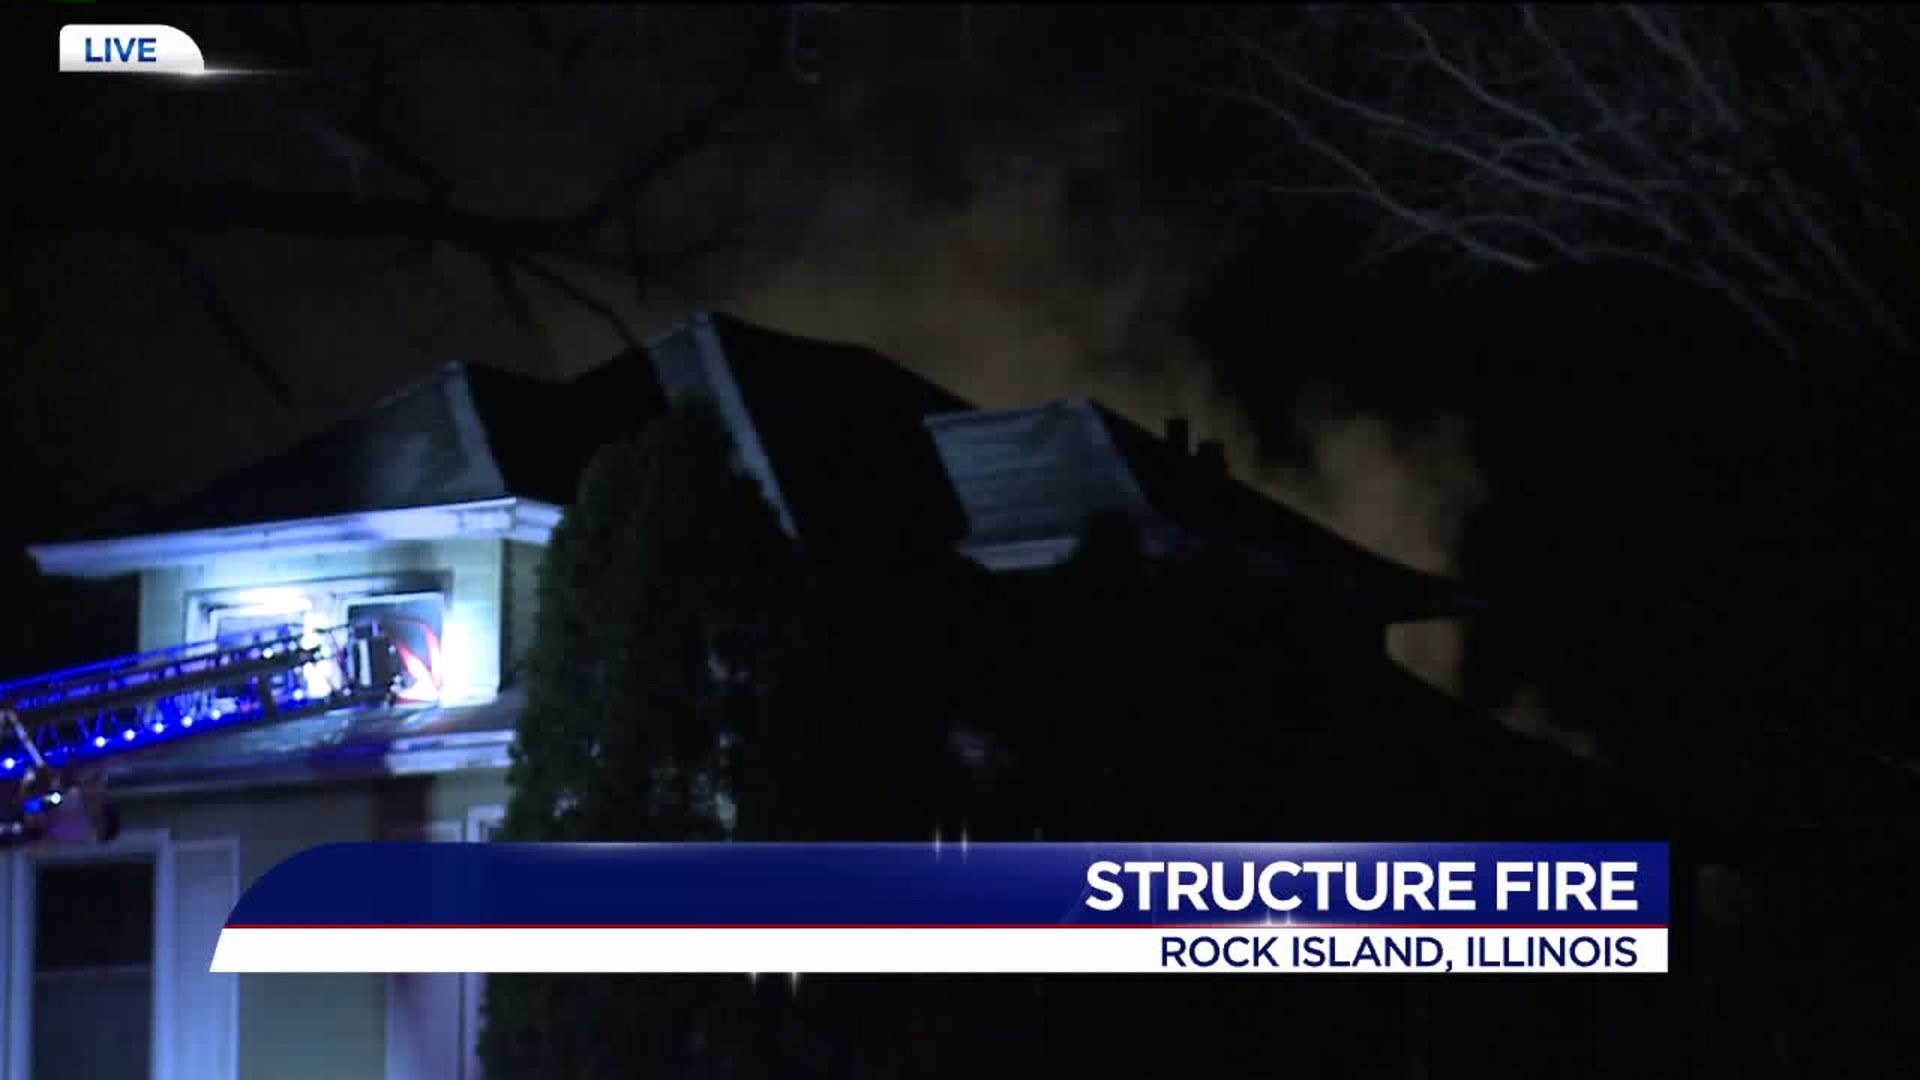 Tuesday Morning Fire in Rock Island